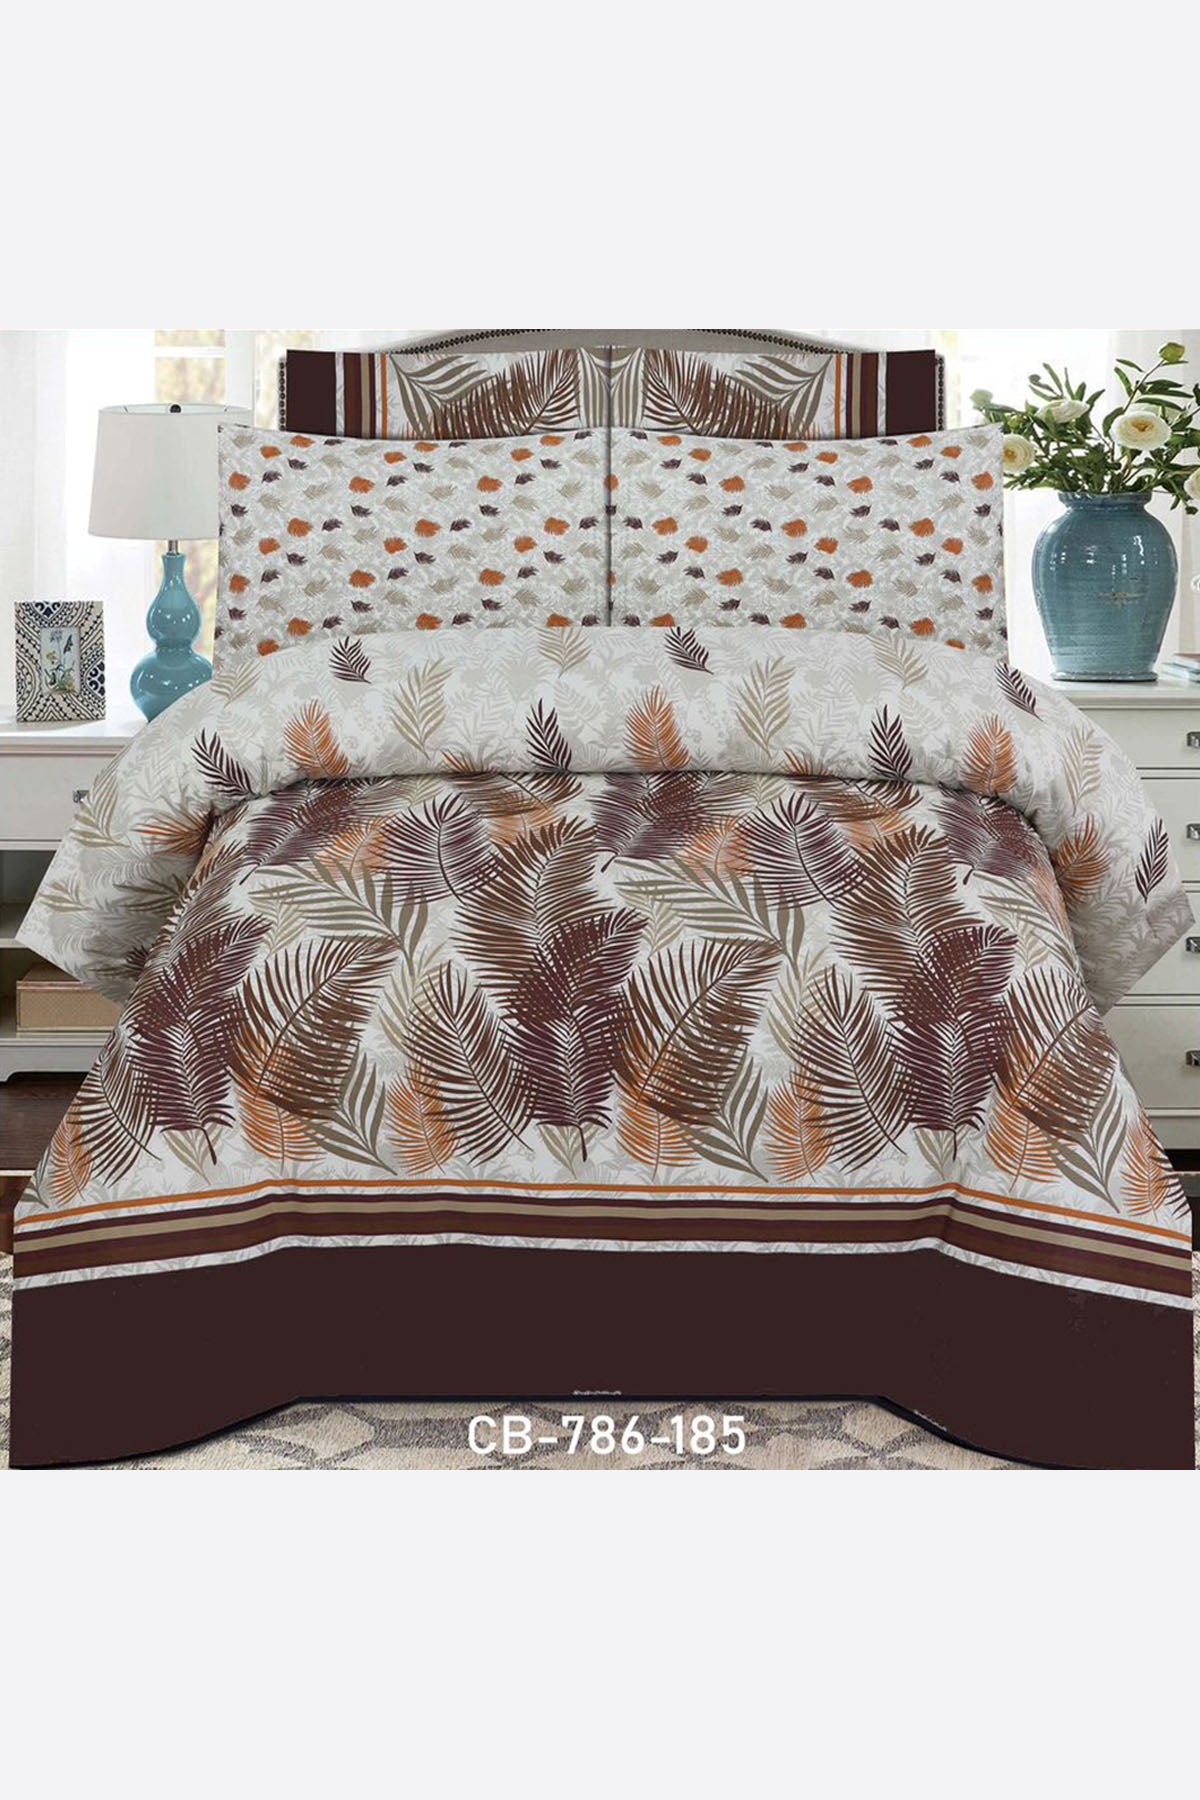 Soft Cotton 3Pc Printed Double Bed Sheet D-185  Cream